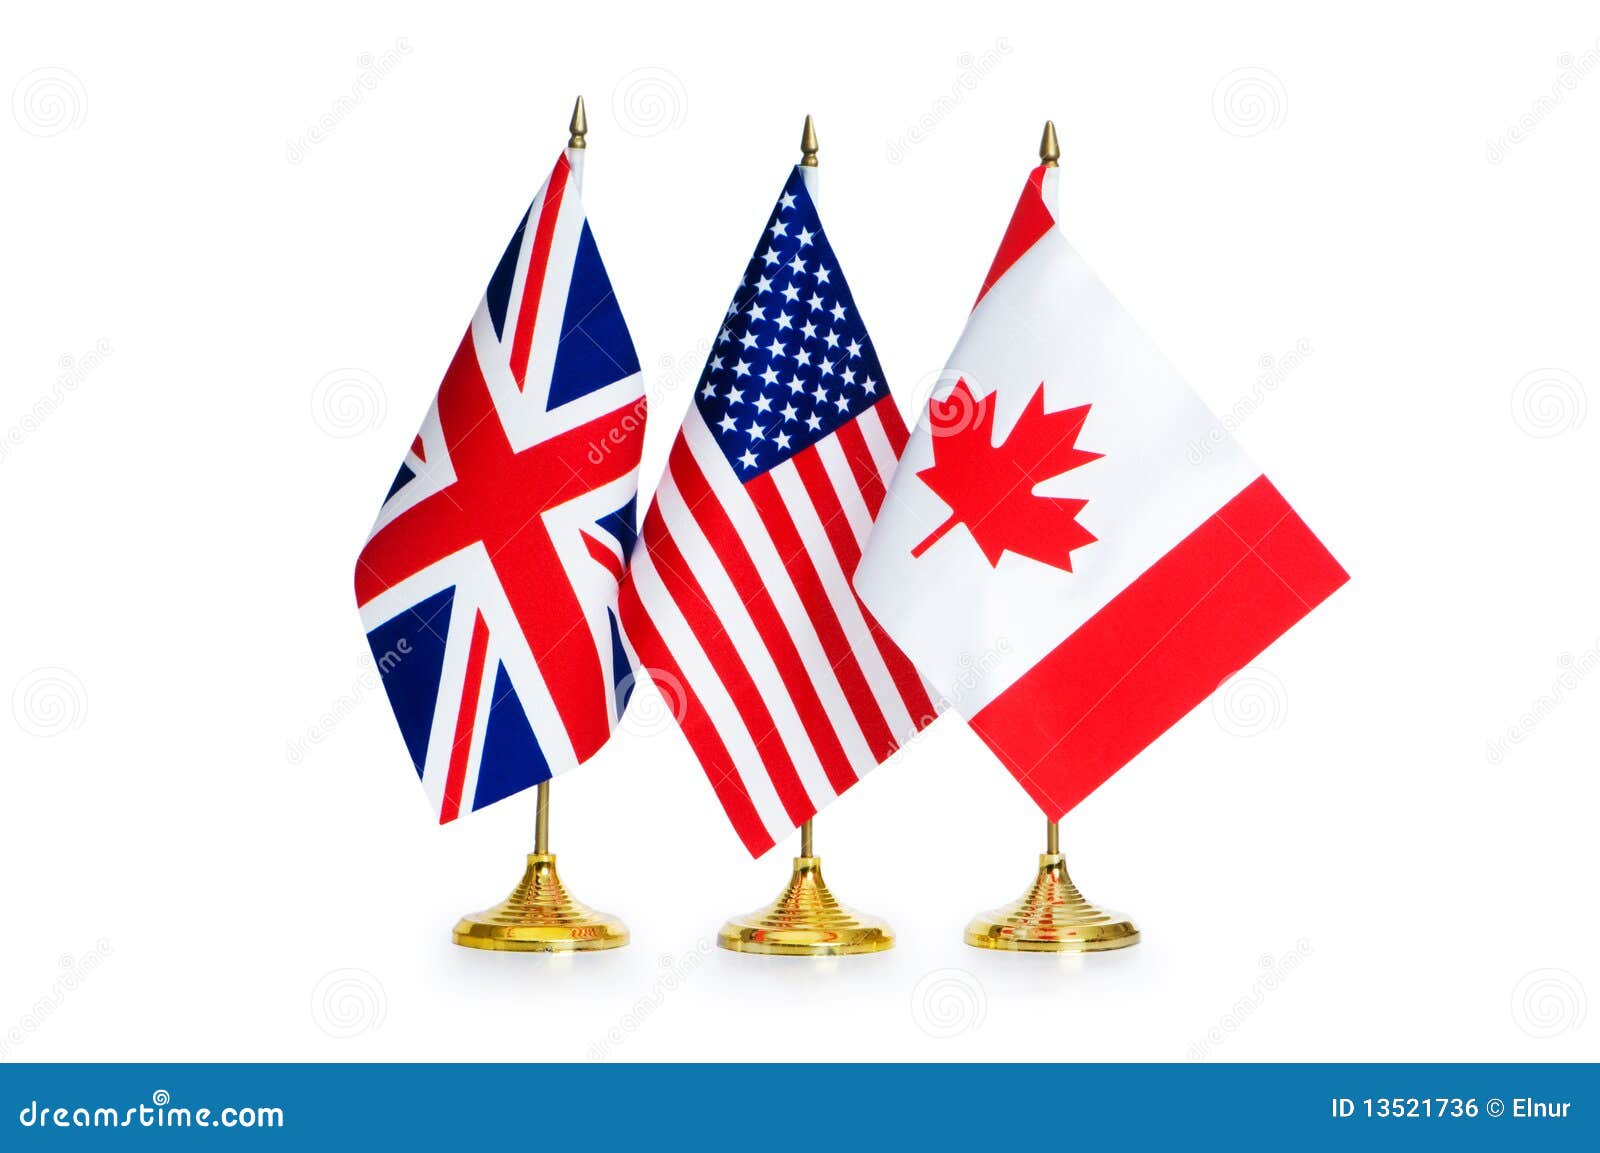 english-speaking-countries-flags-royalty-free-stock-image-image-13521736